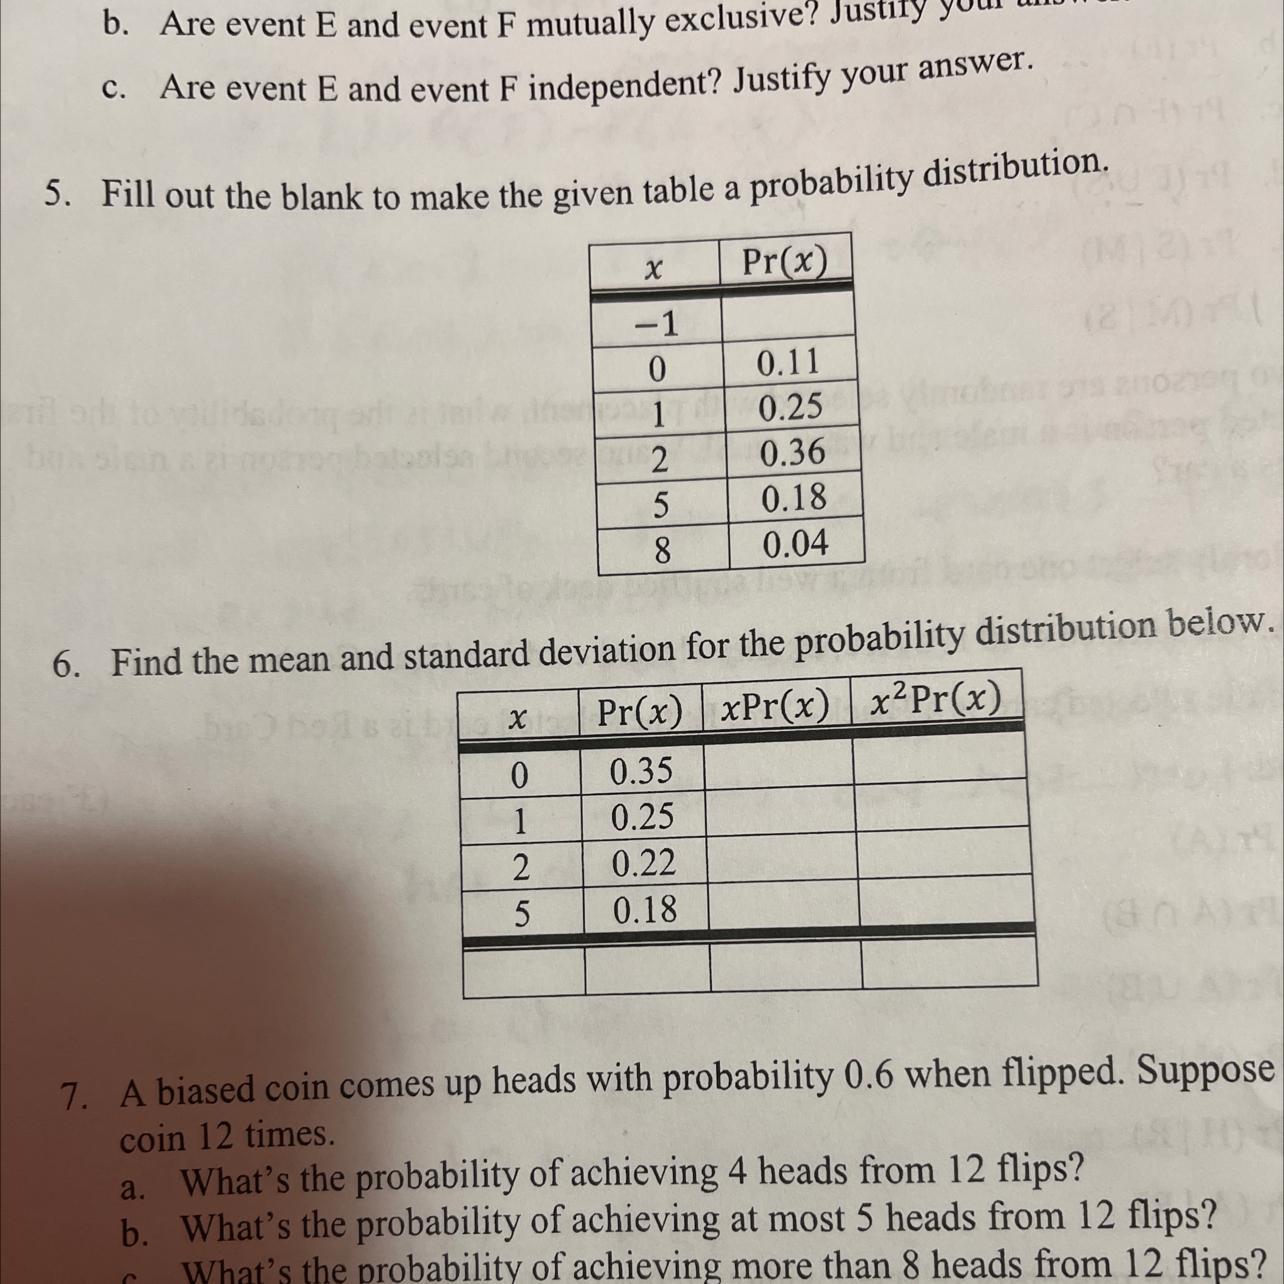 Fill Out The Blank To Make The Given Table A Probability Distribution.